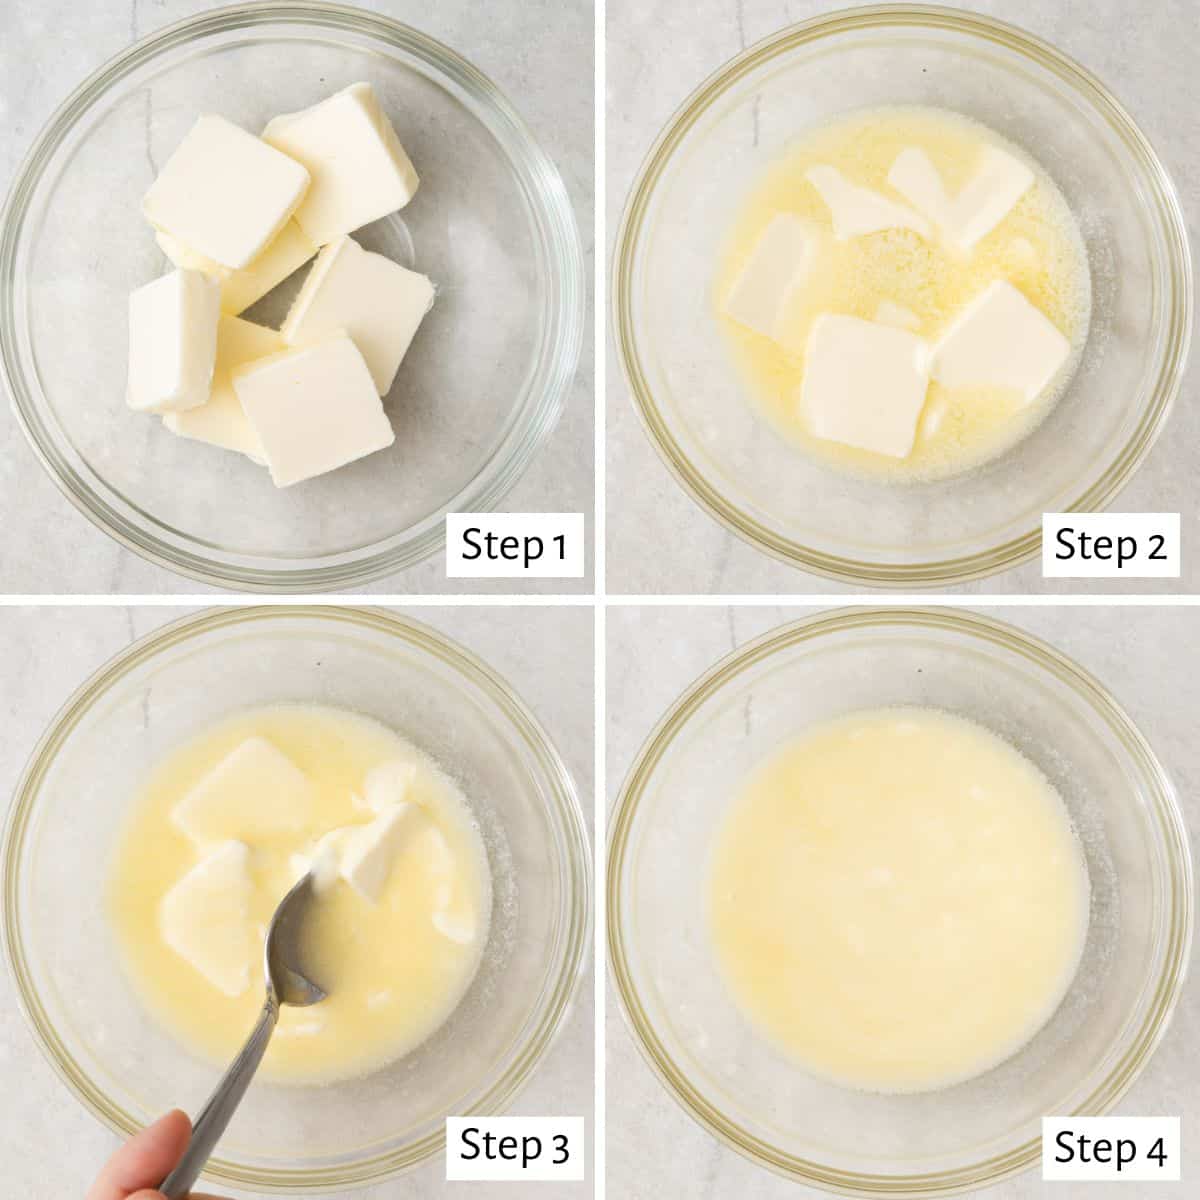 4 image collage of recipe tutorial: 1- sliced butter in a microwave safe bowl, 2- spoon stirring with some partially melted, 3- butter after melting with solids, 4- butter after fully melting.